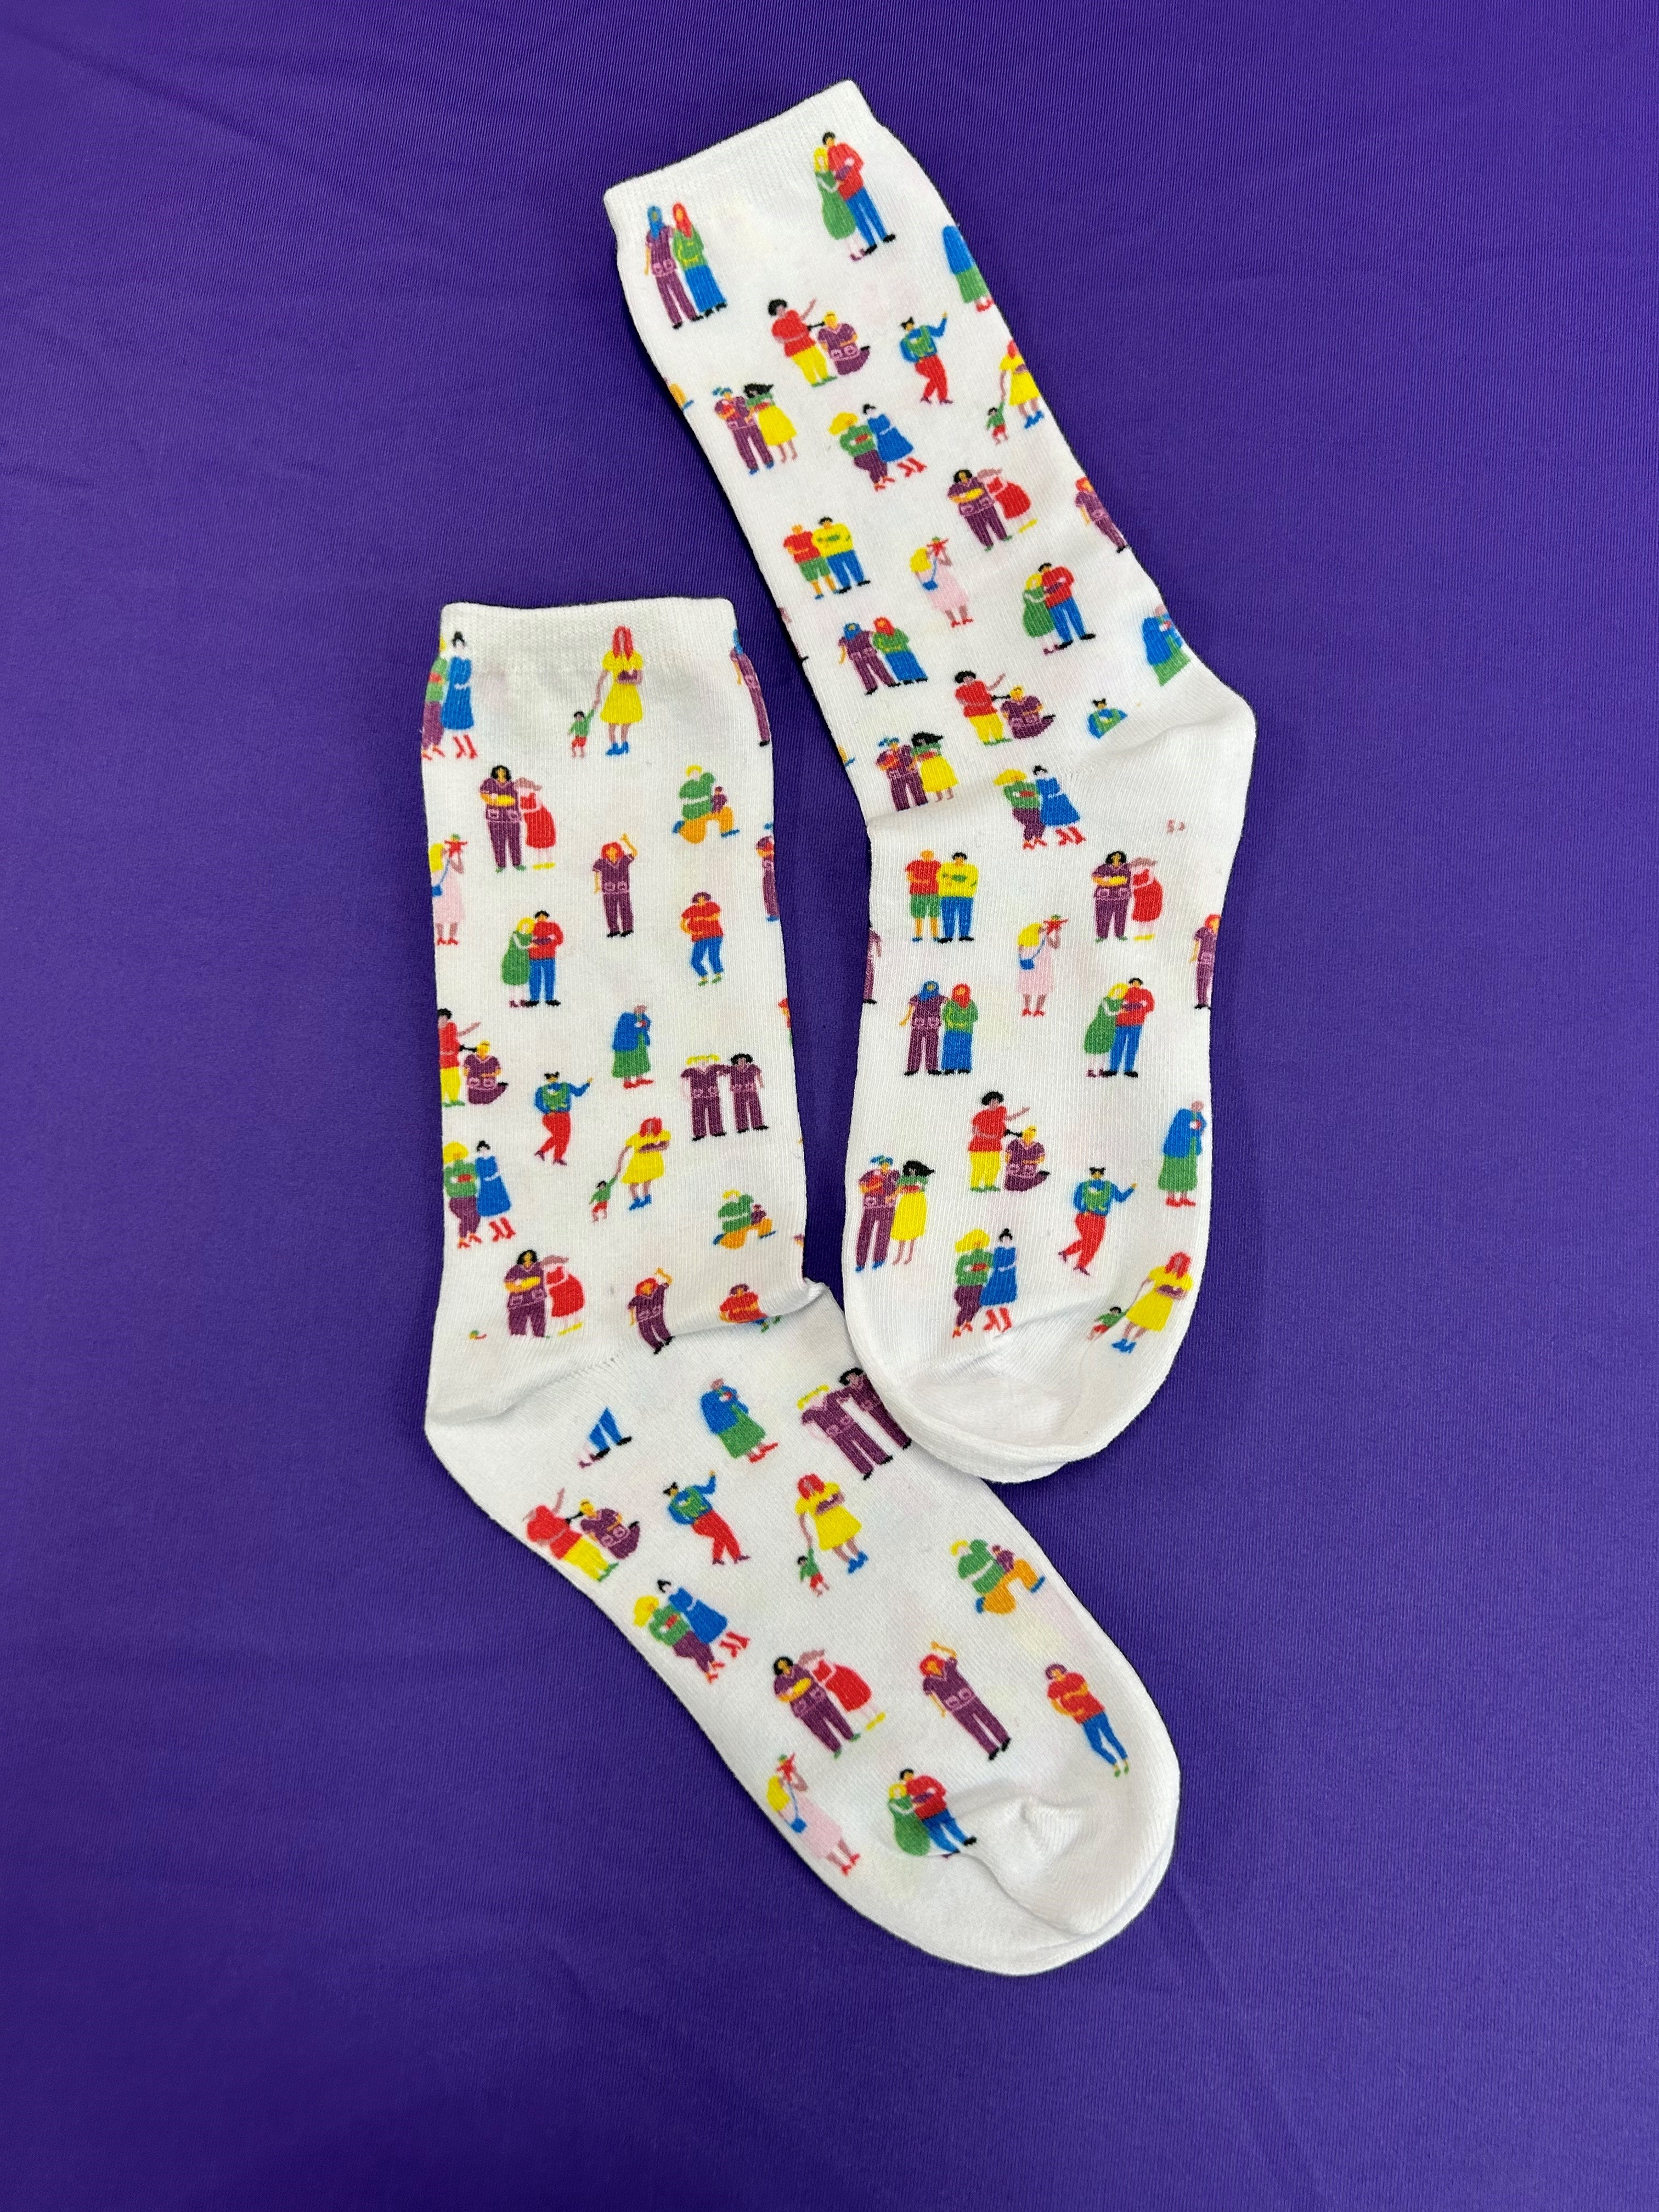 Limited Edition Midwives Socks